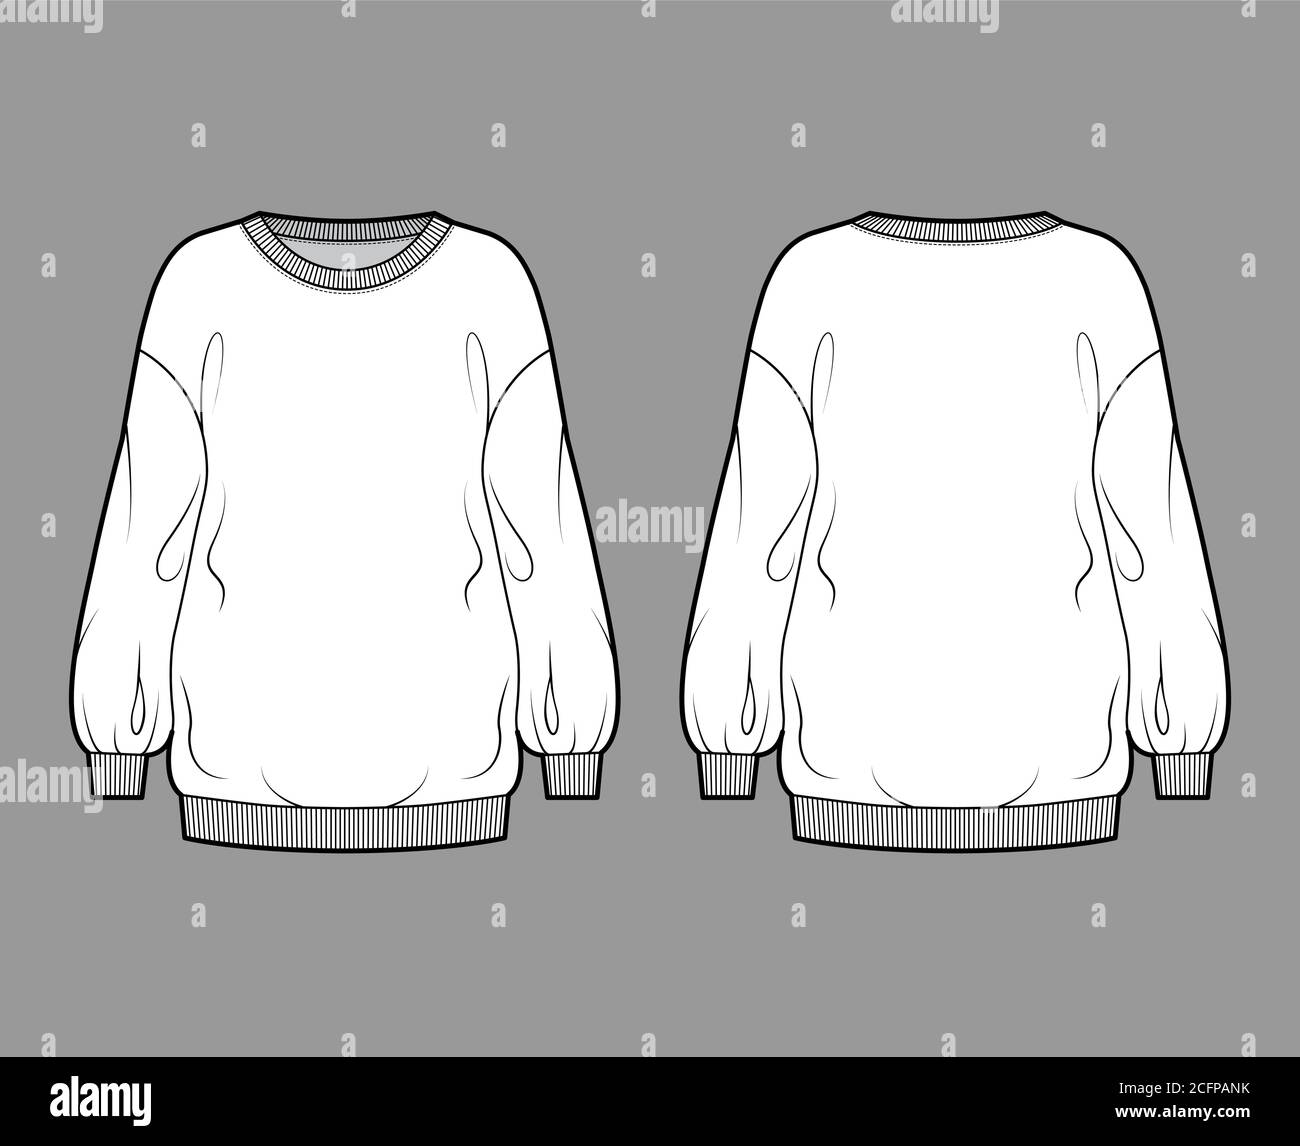 Cotton-terry slouchy oversized sweatshirt technical fashion illustration with loose relaxed fit, crew neckline, long sleeves. Flat jumper template front, back white color. Women, men, unisex top CAD Stock Vector